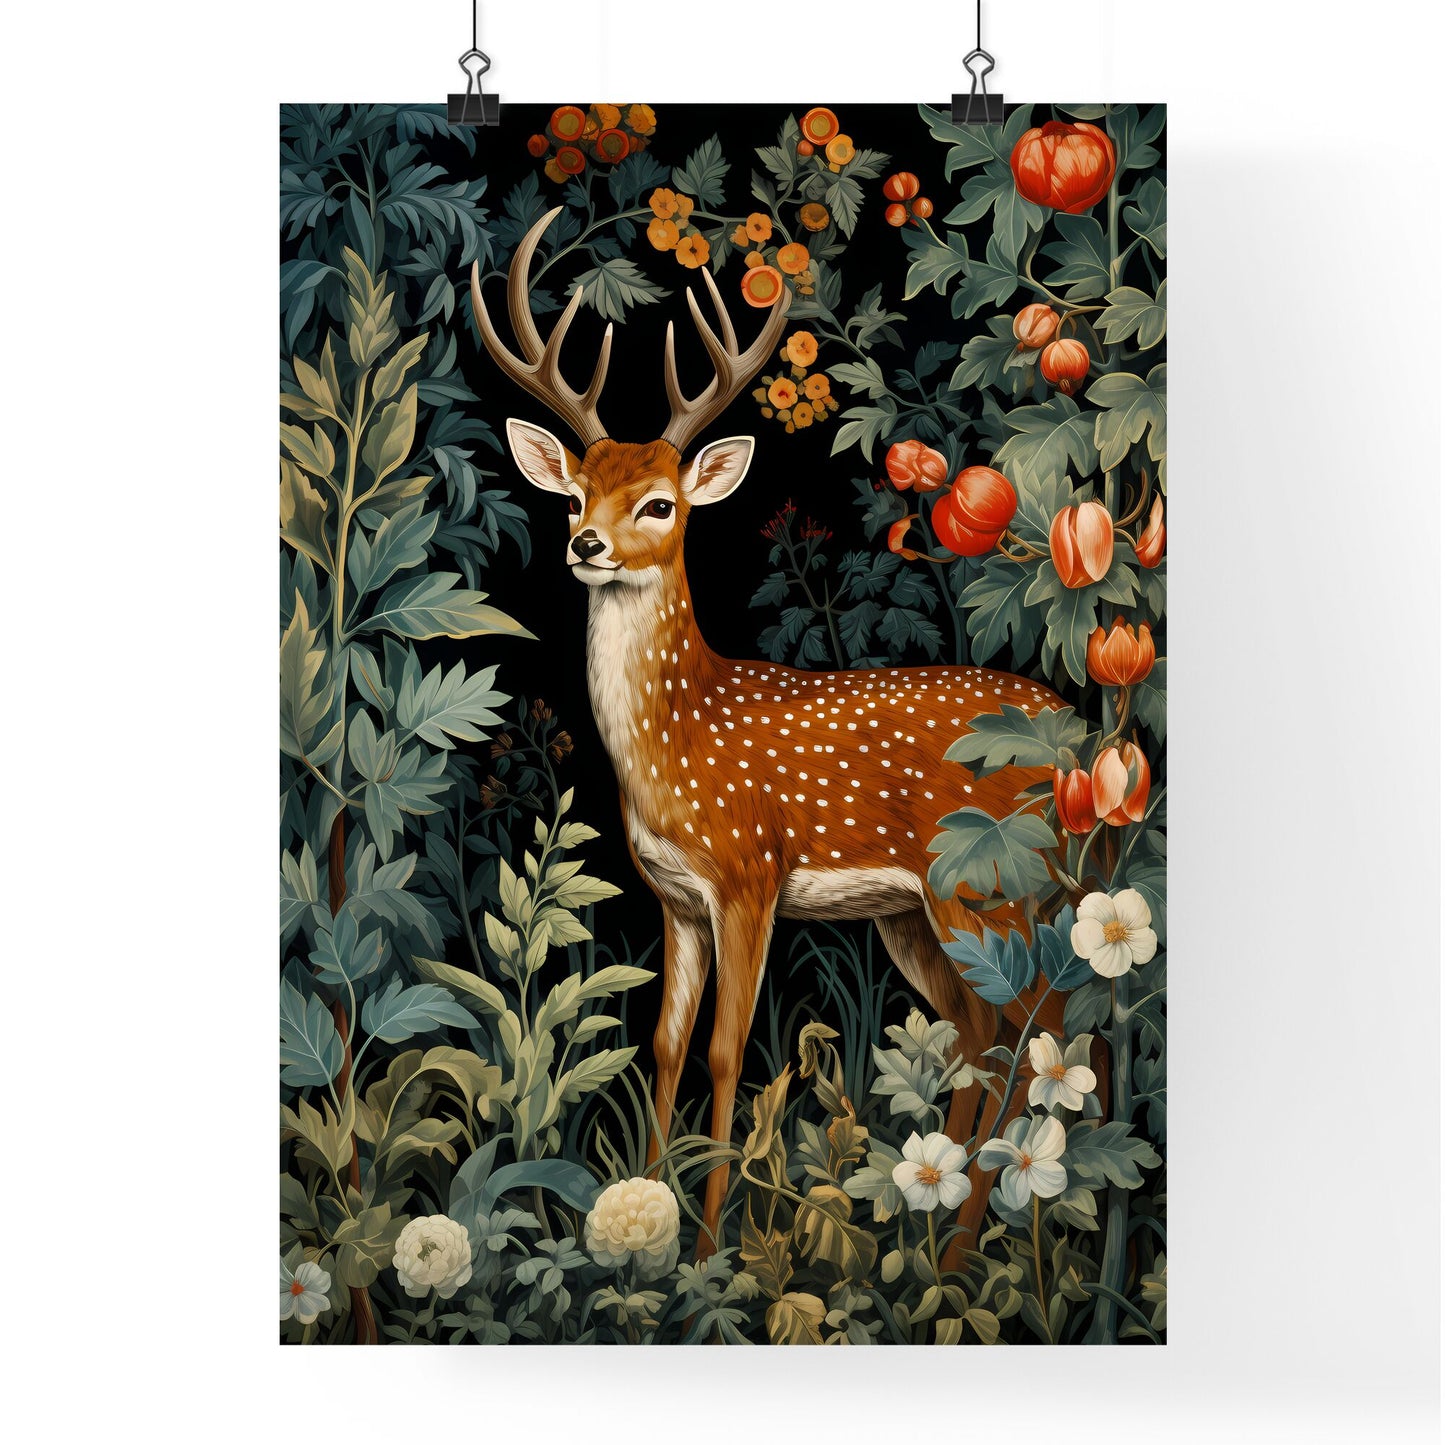 A Poster of a deer in the middle of floral tapestry - A Painting Of A Deer In A Forest Default Title